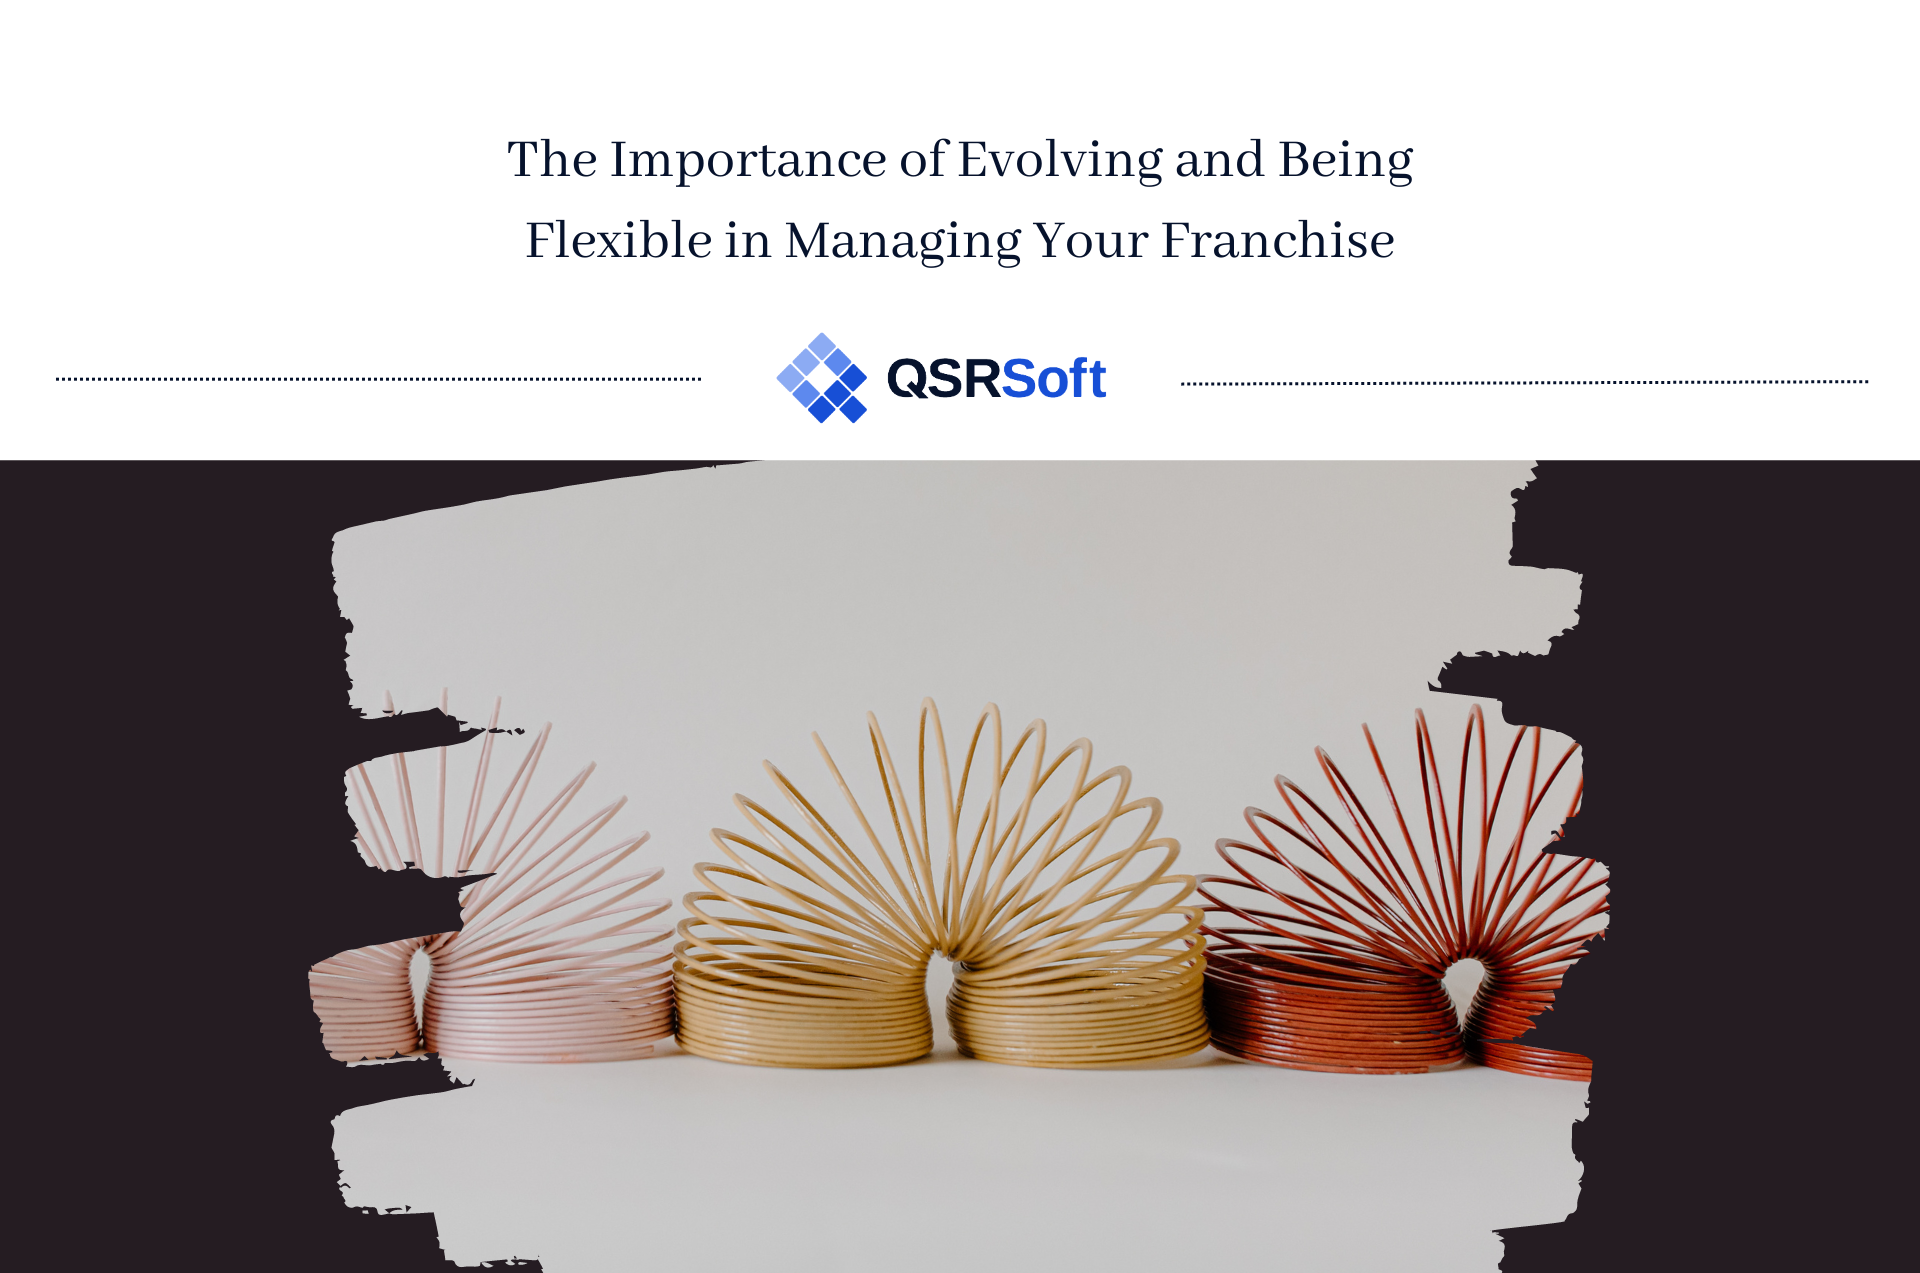 The Importance of Evolving and Being Flexible in Managing Your Franchise